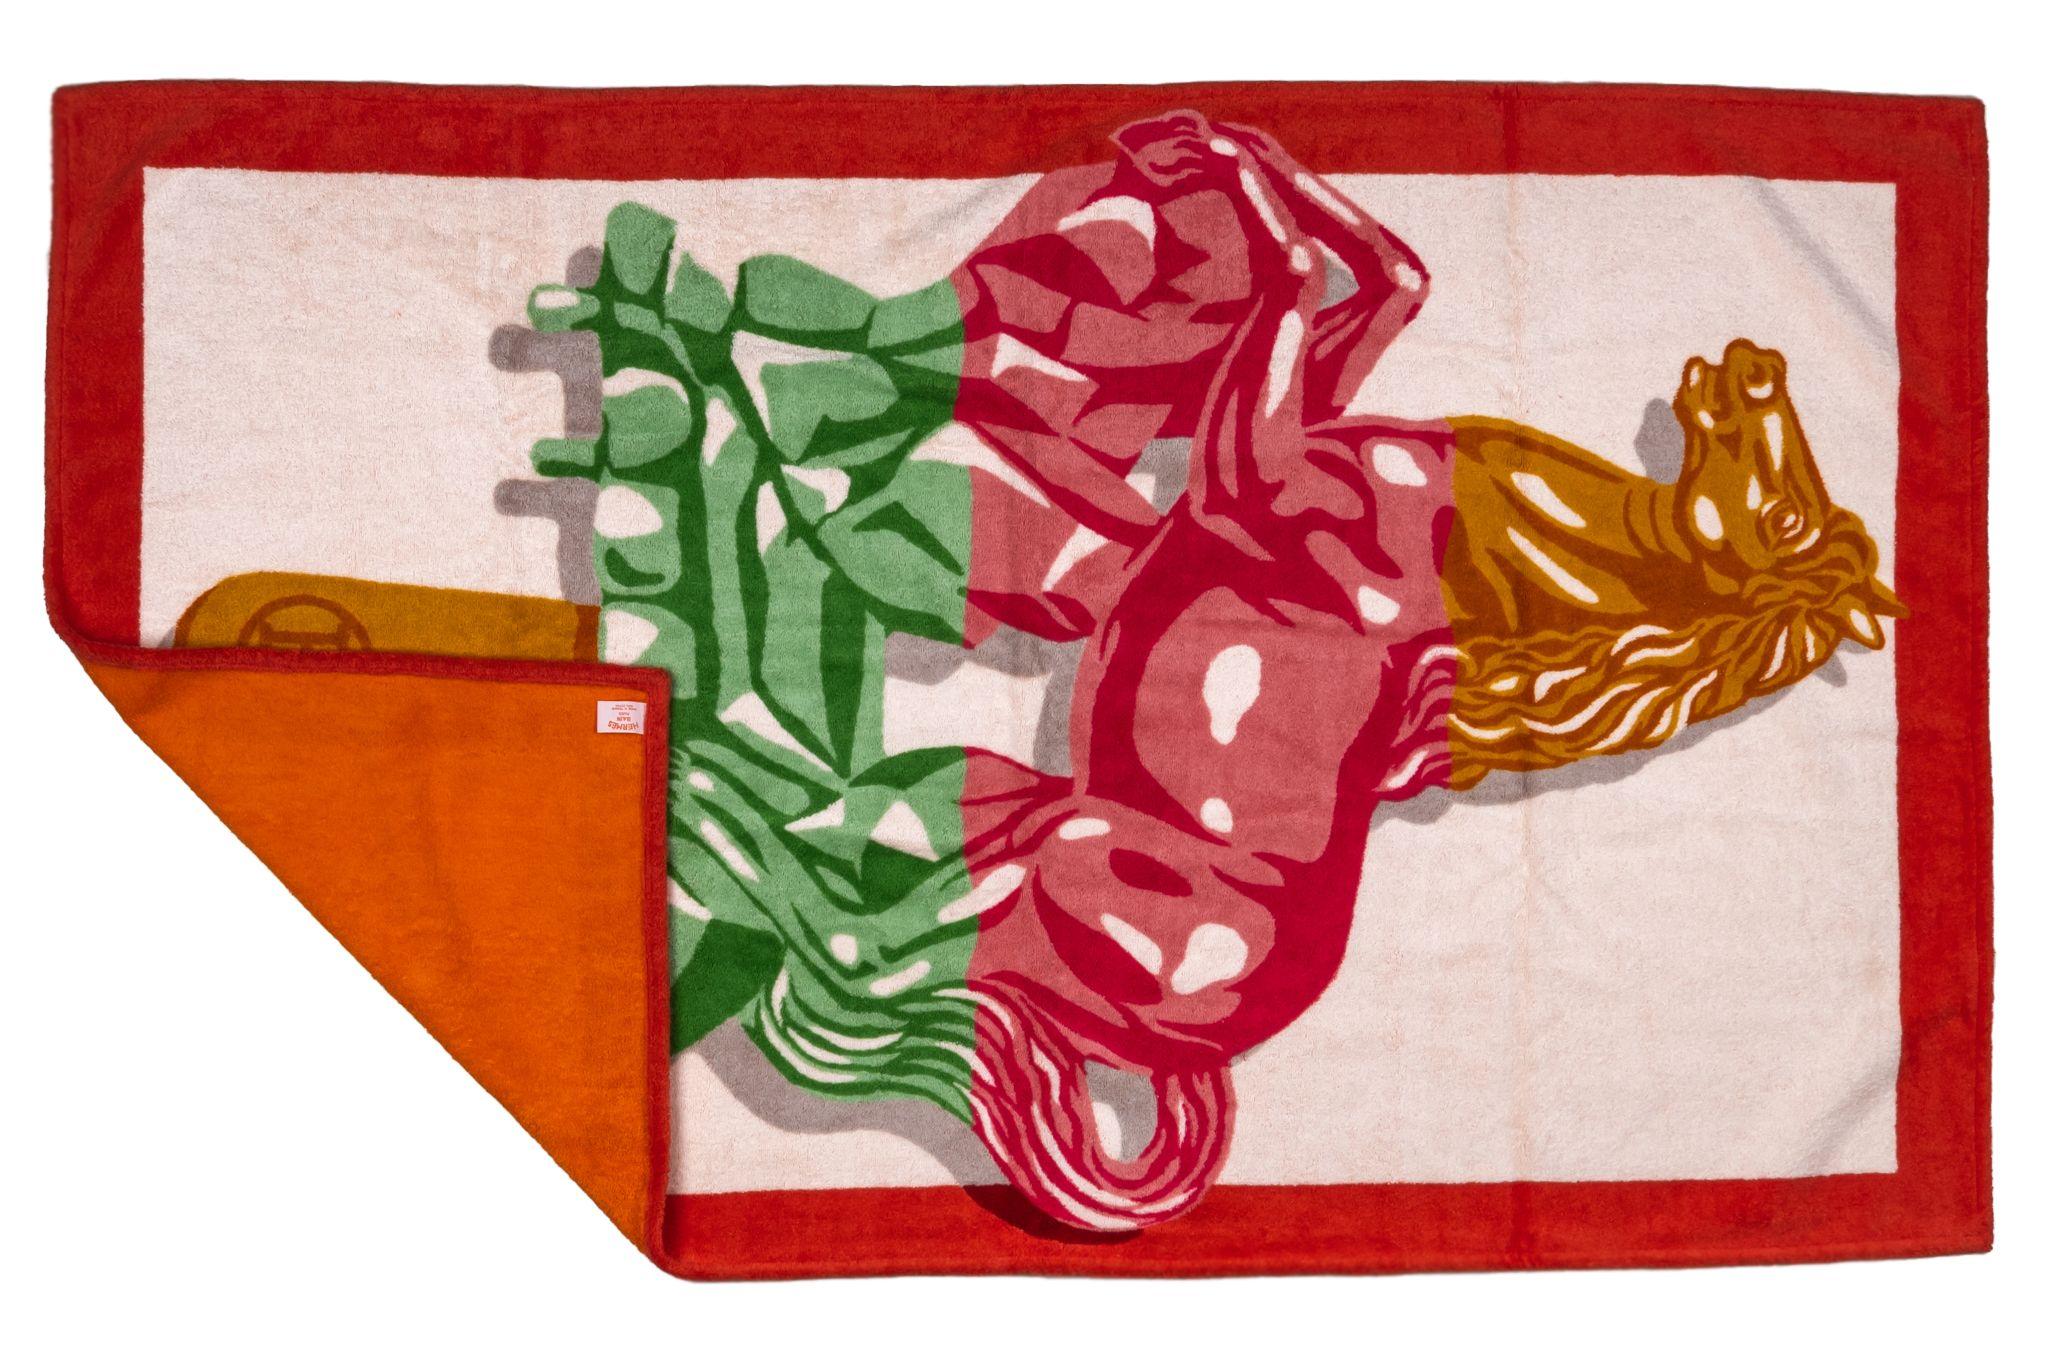 Hermès Italy Colored Horse Silk Scarf. The pattern shows a ice in form of a horse in the colors of the italian flag. Piece is in new condition.